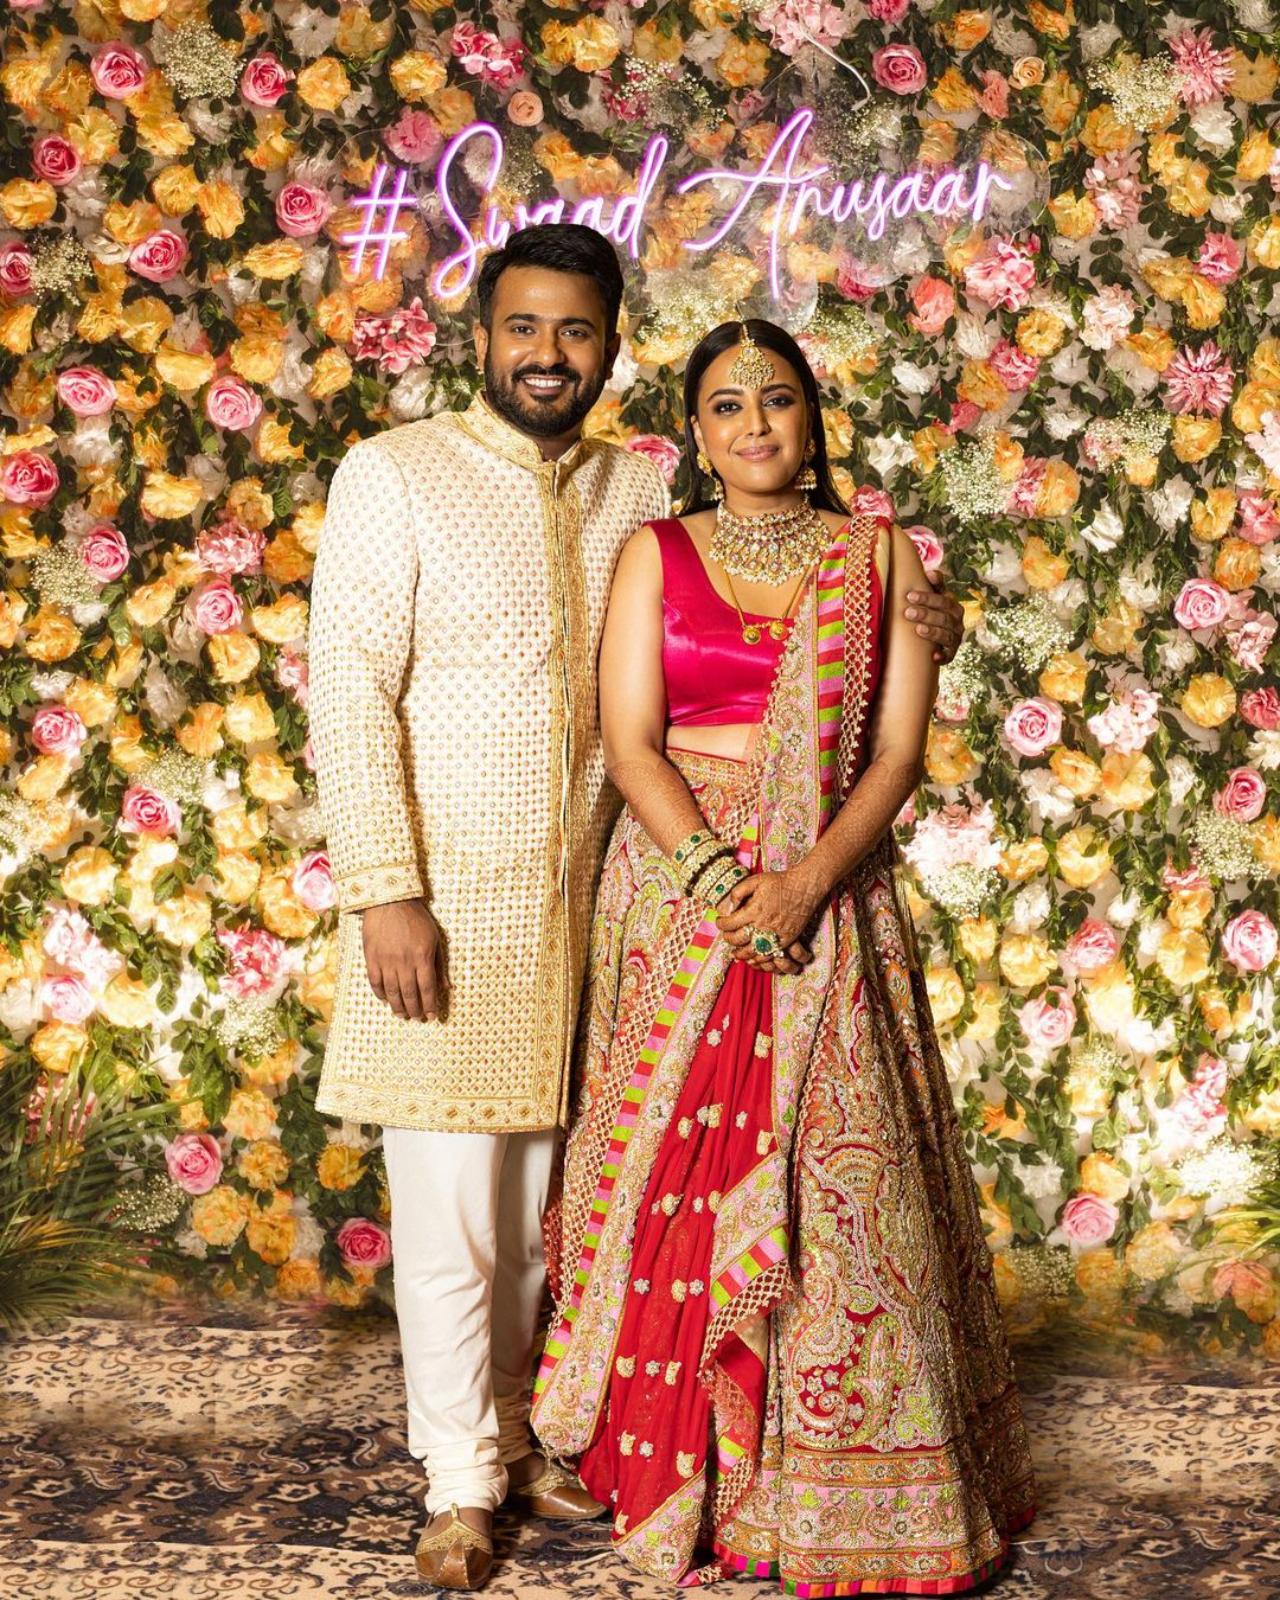 Swara Bhasker and Fahad Ahmad had a court marriage last month. However, the couple also celebrated their marriage with mehendi, haldi, and other ceremonies. They concluded their celebrations with a reception in Delhi on Thursday night. For the ceremony, the couple opted for outfits designed by ace designers Abu Jani Sandeep Khosla